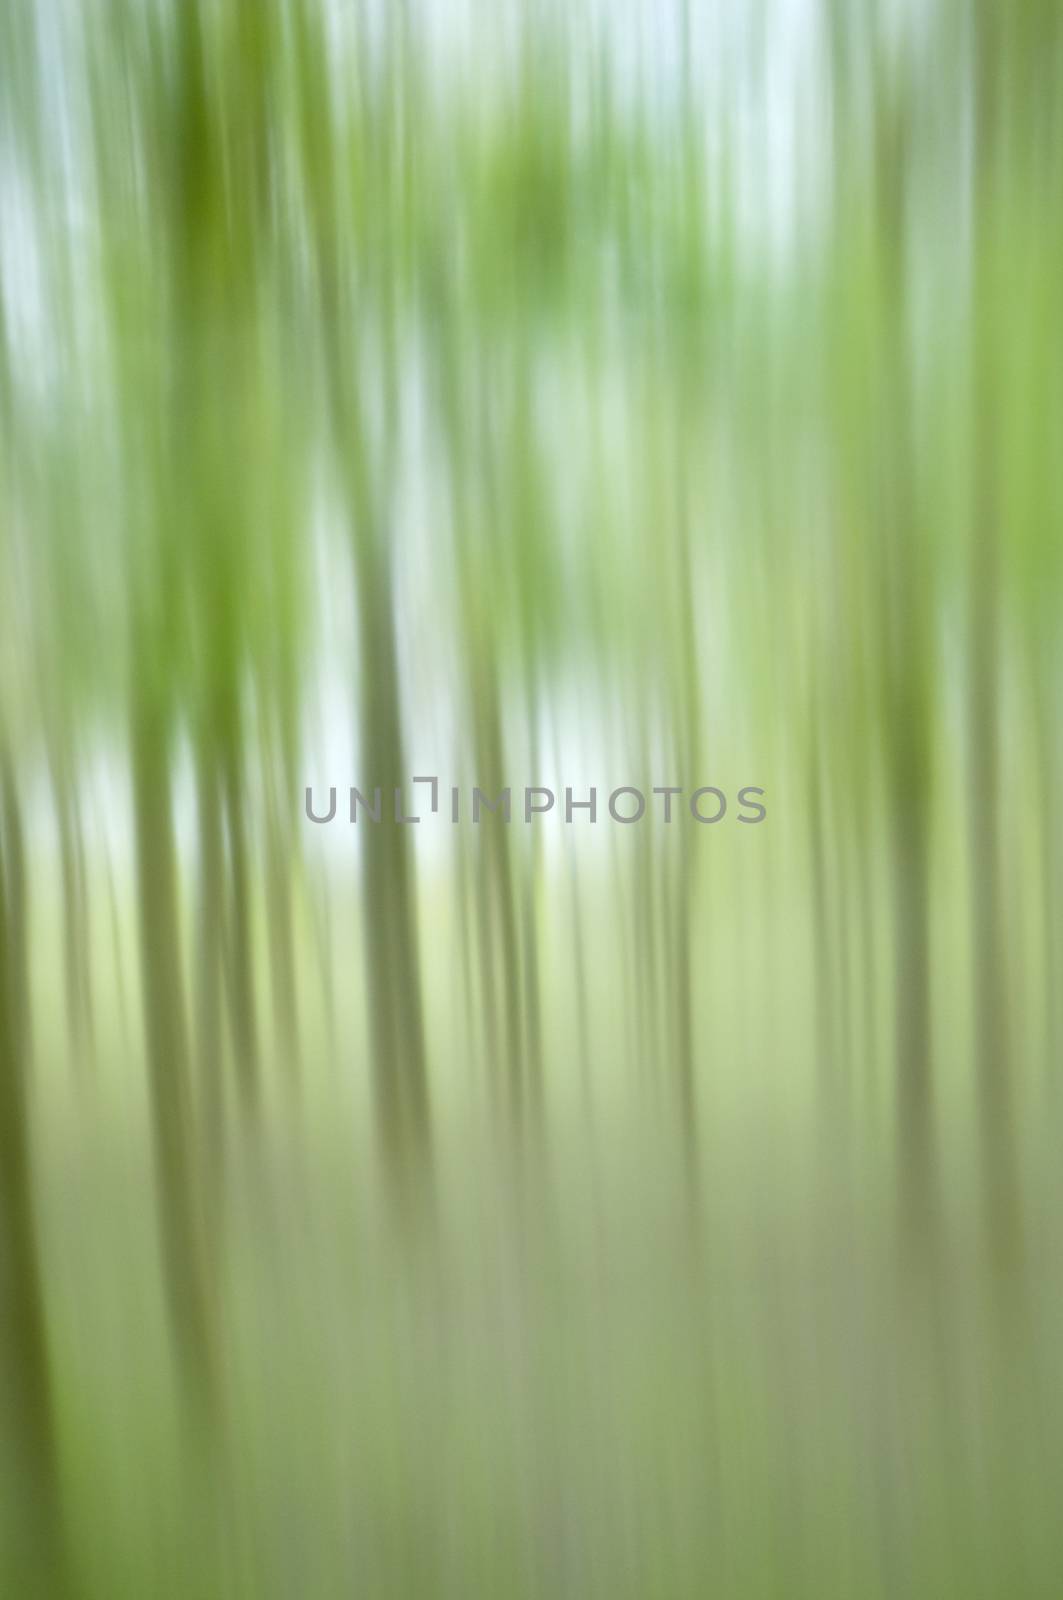 Blurred image of a plantation of young trees